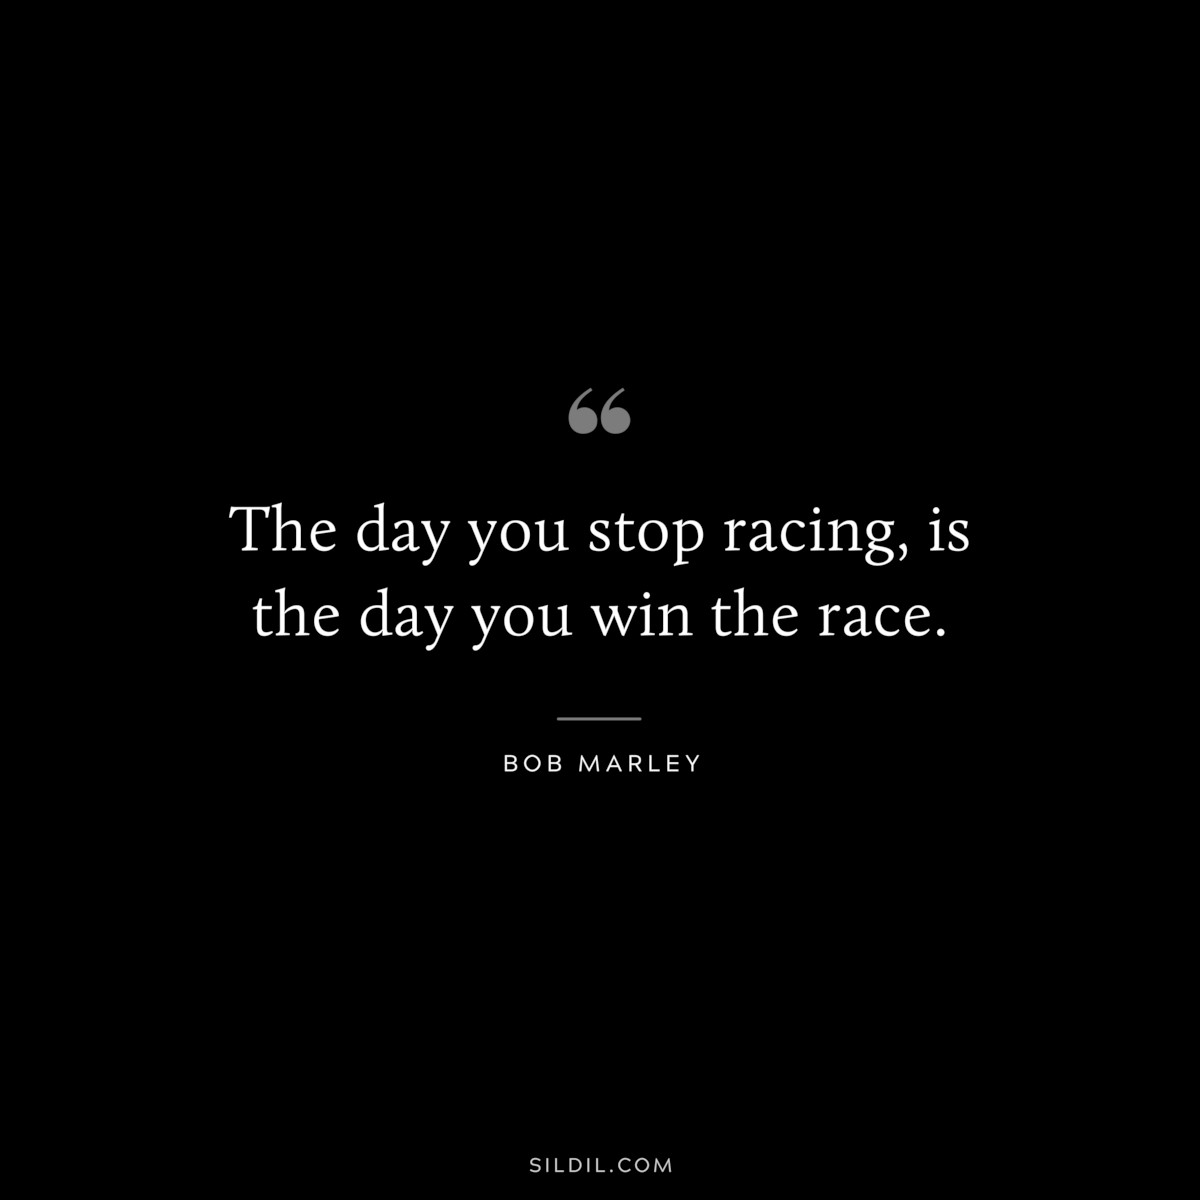 The day you stop racing, is the day you win the race. ― Bob Marley